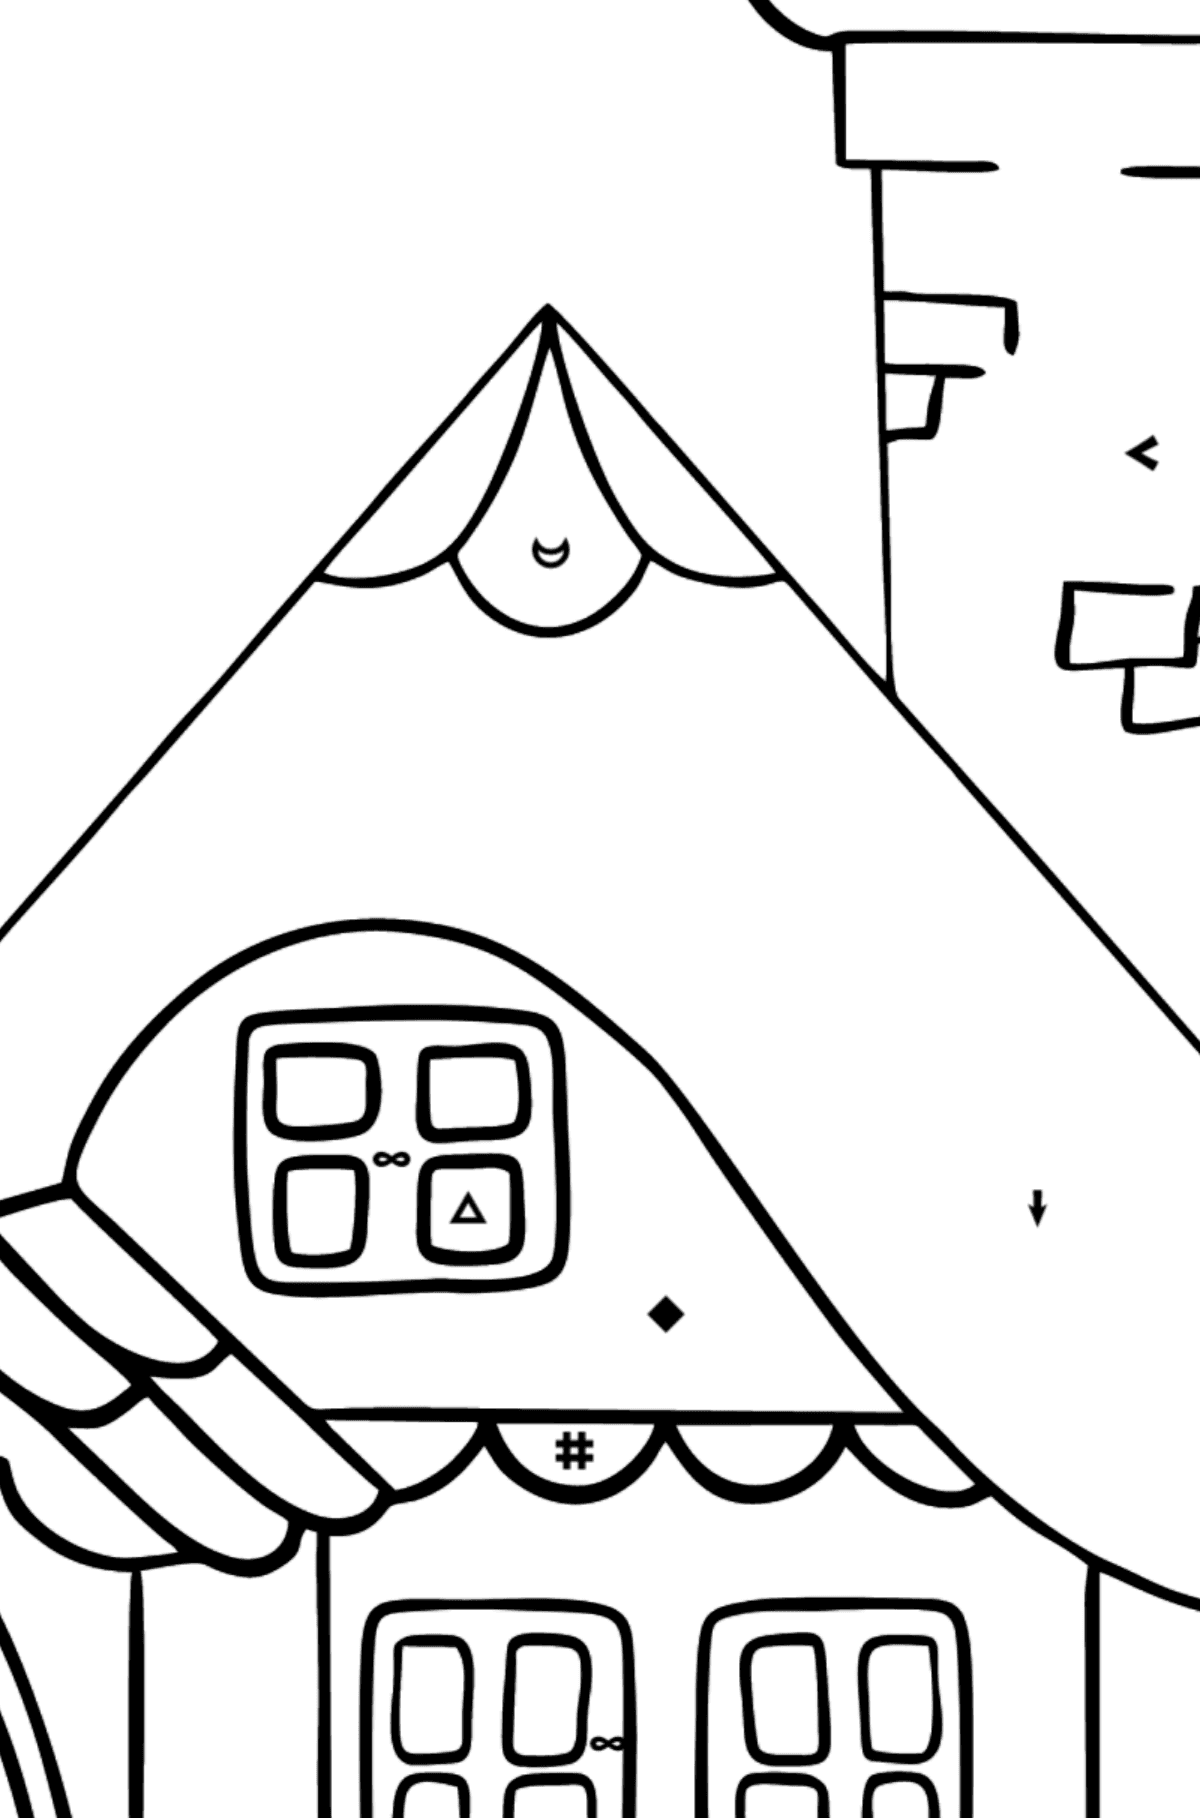 Coloring Page - A Wonderful House - Coloring by Symbols for Kids